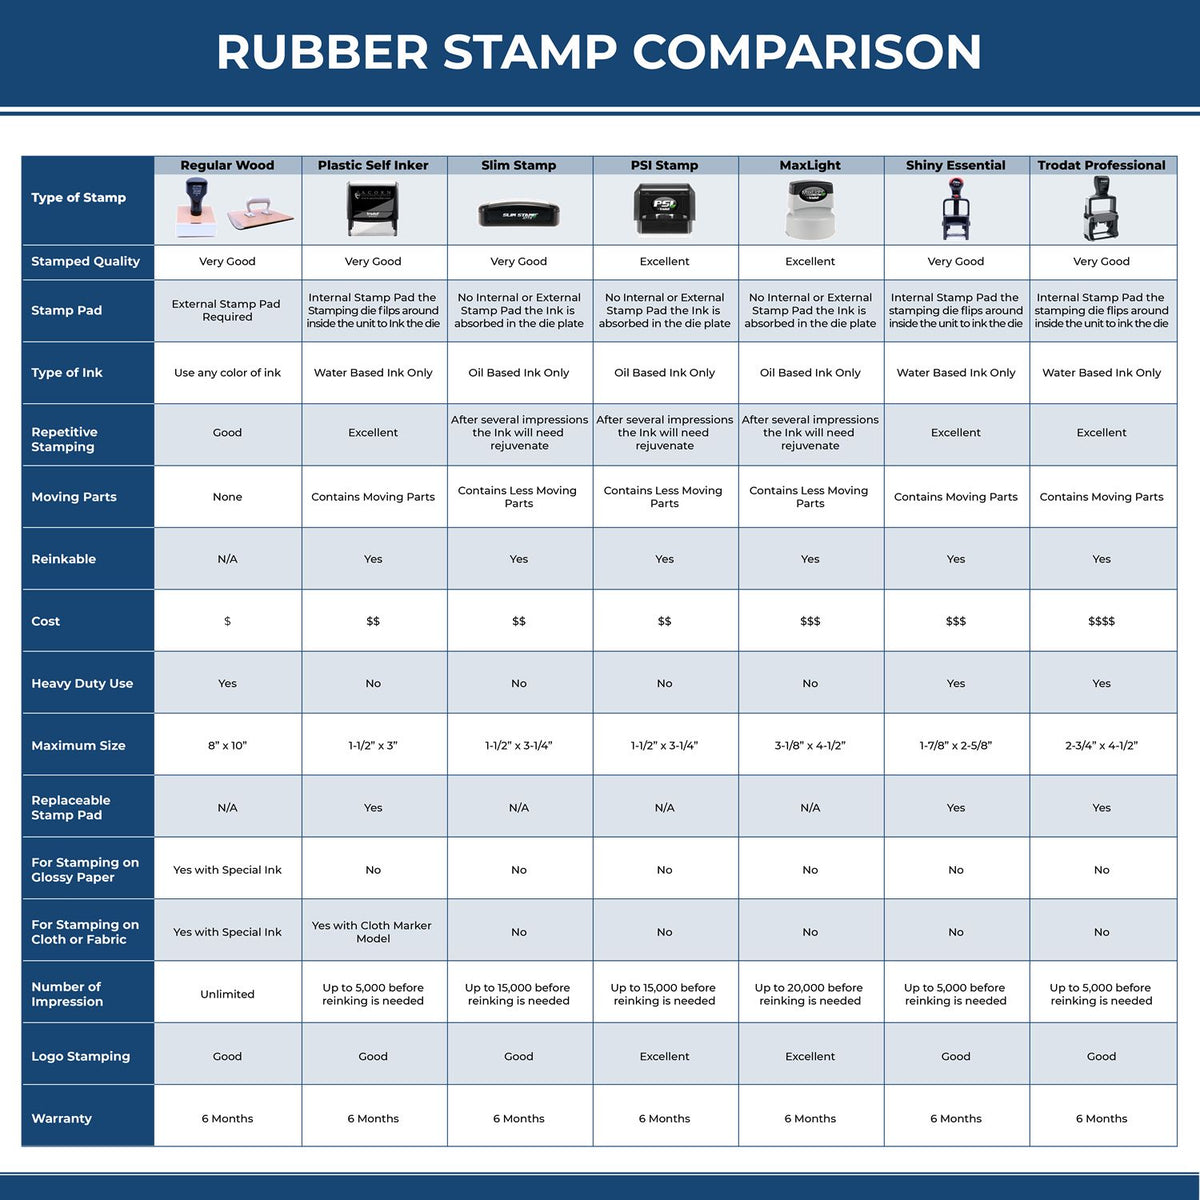 A comparison chart for the different types of mount models available for the Wooden Handle Connecticut State Seal Notary Public Stamp.